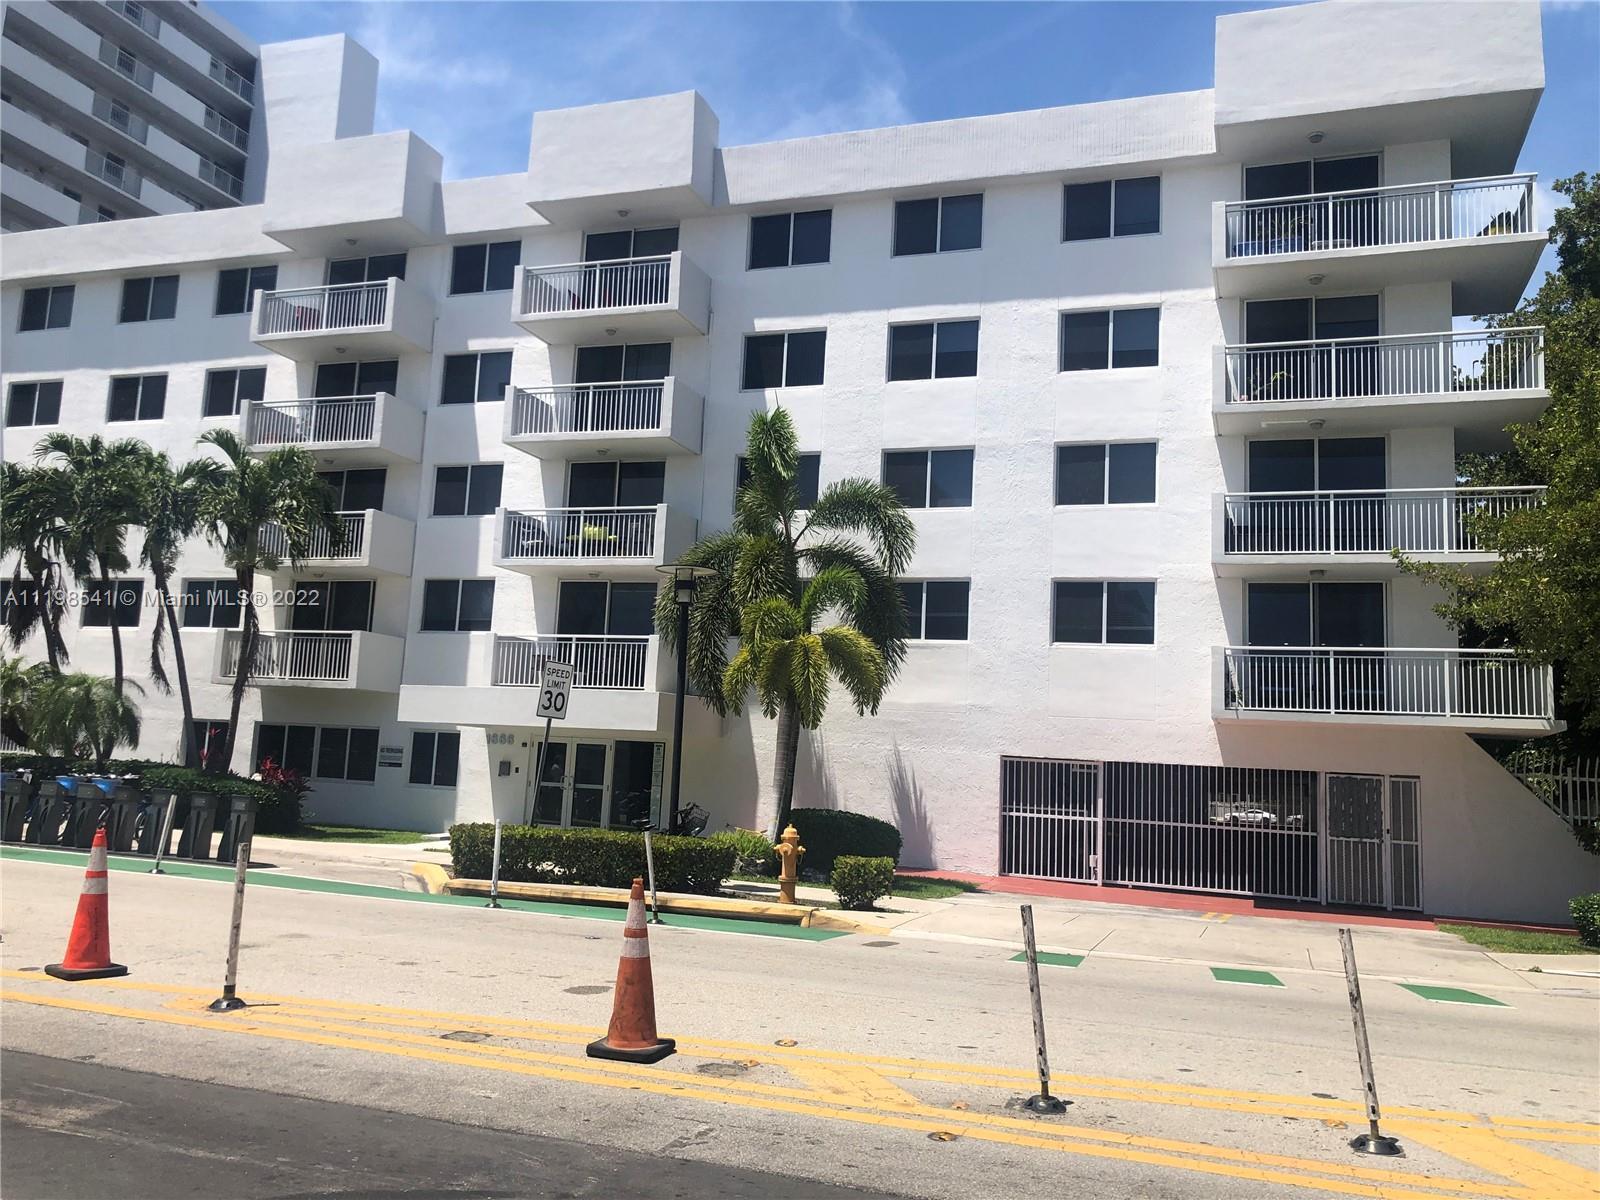 South Beach Condo located on desirable Bay Road.  Third floor 1 Bedroom/2 Bath unit with 752 Sq. FT.